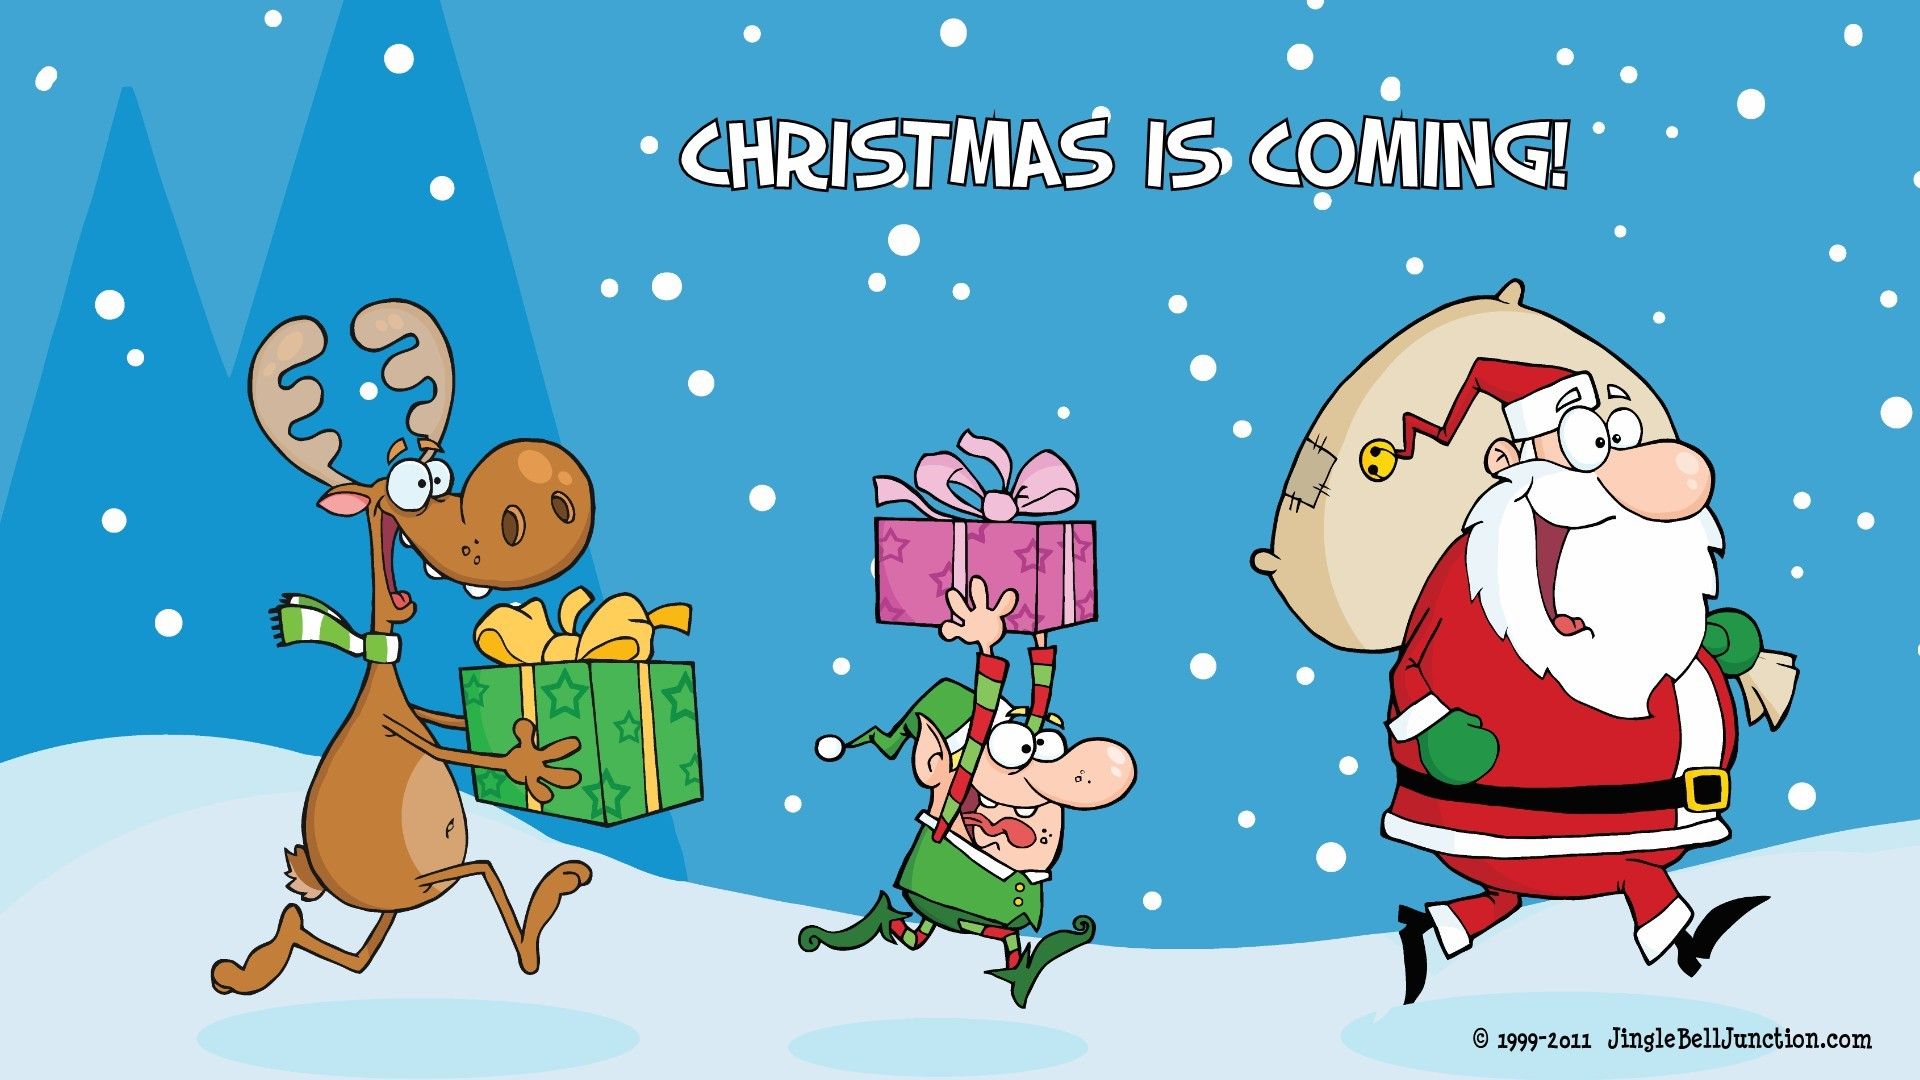 Trends For Wallpaper Cute Christmas Aesthetic Cartoon image